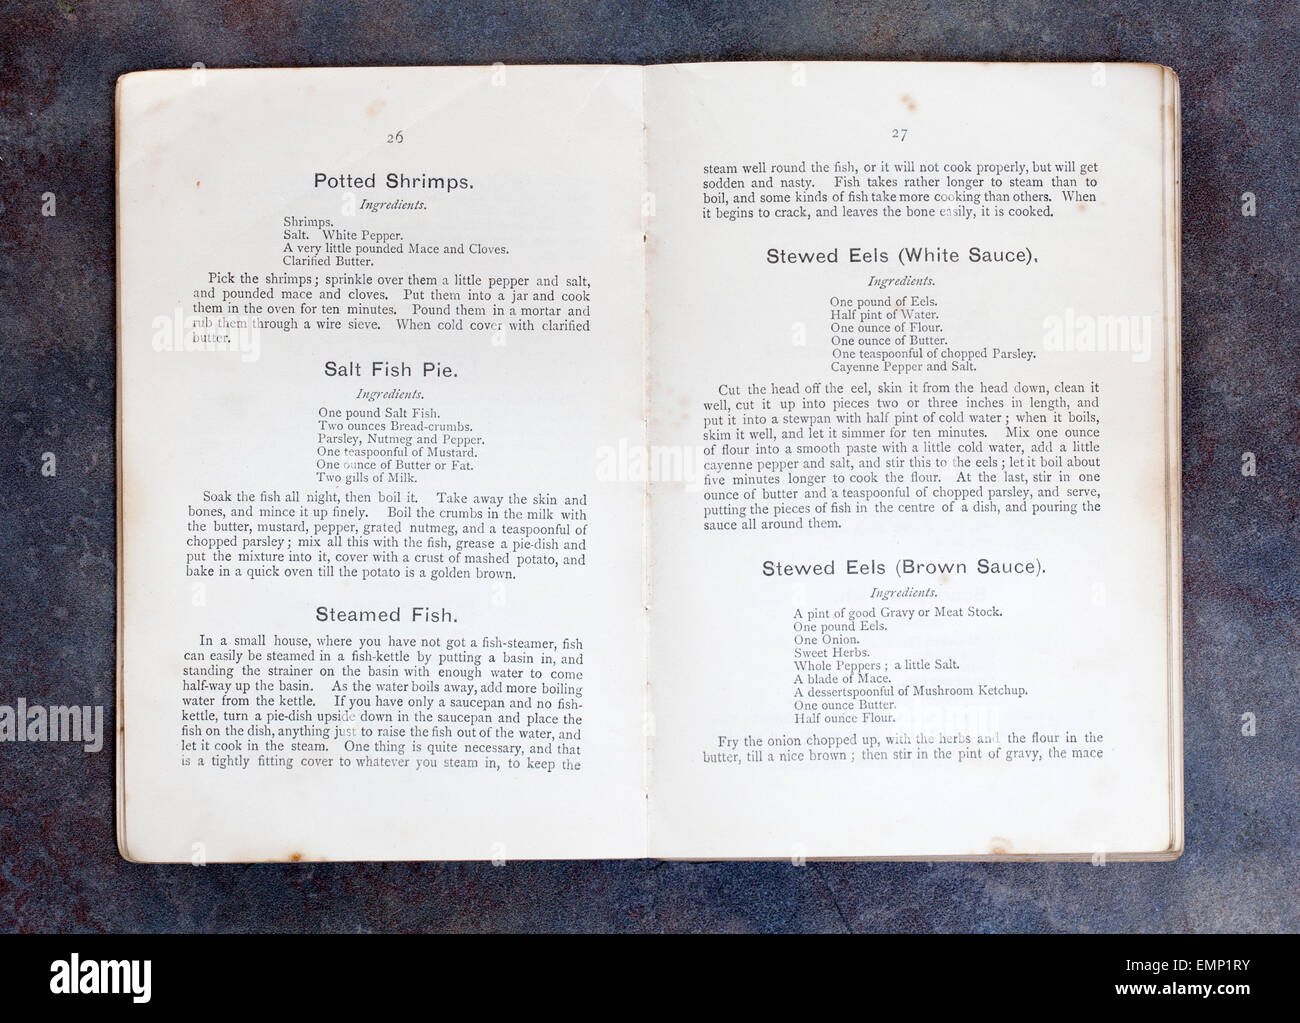 Fish Dishes - Potted Shrimps, Salt Fish Pie, Steamed Fish, Stewed Eels from Plain Cookery Recipes by Mrs Charles Clarke Stock Photo